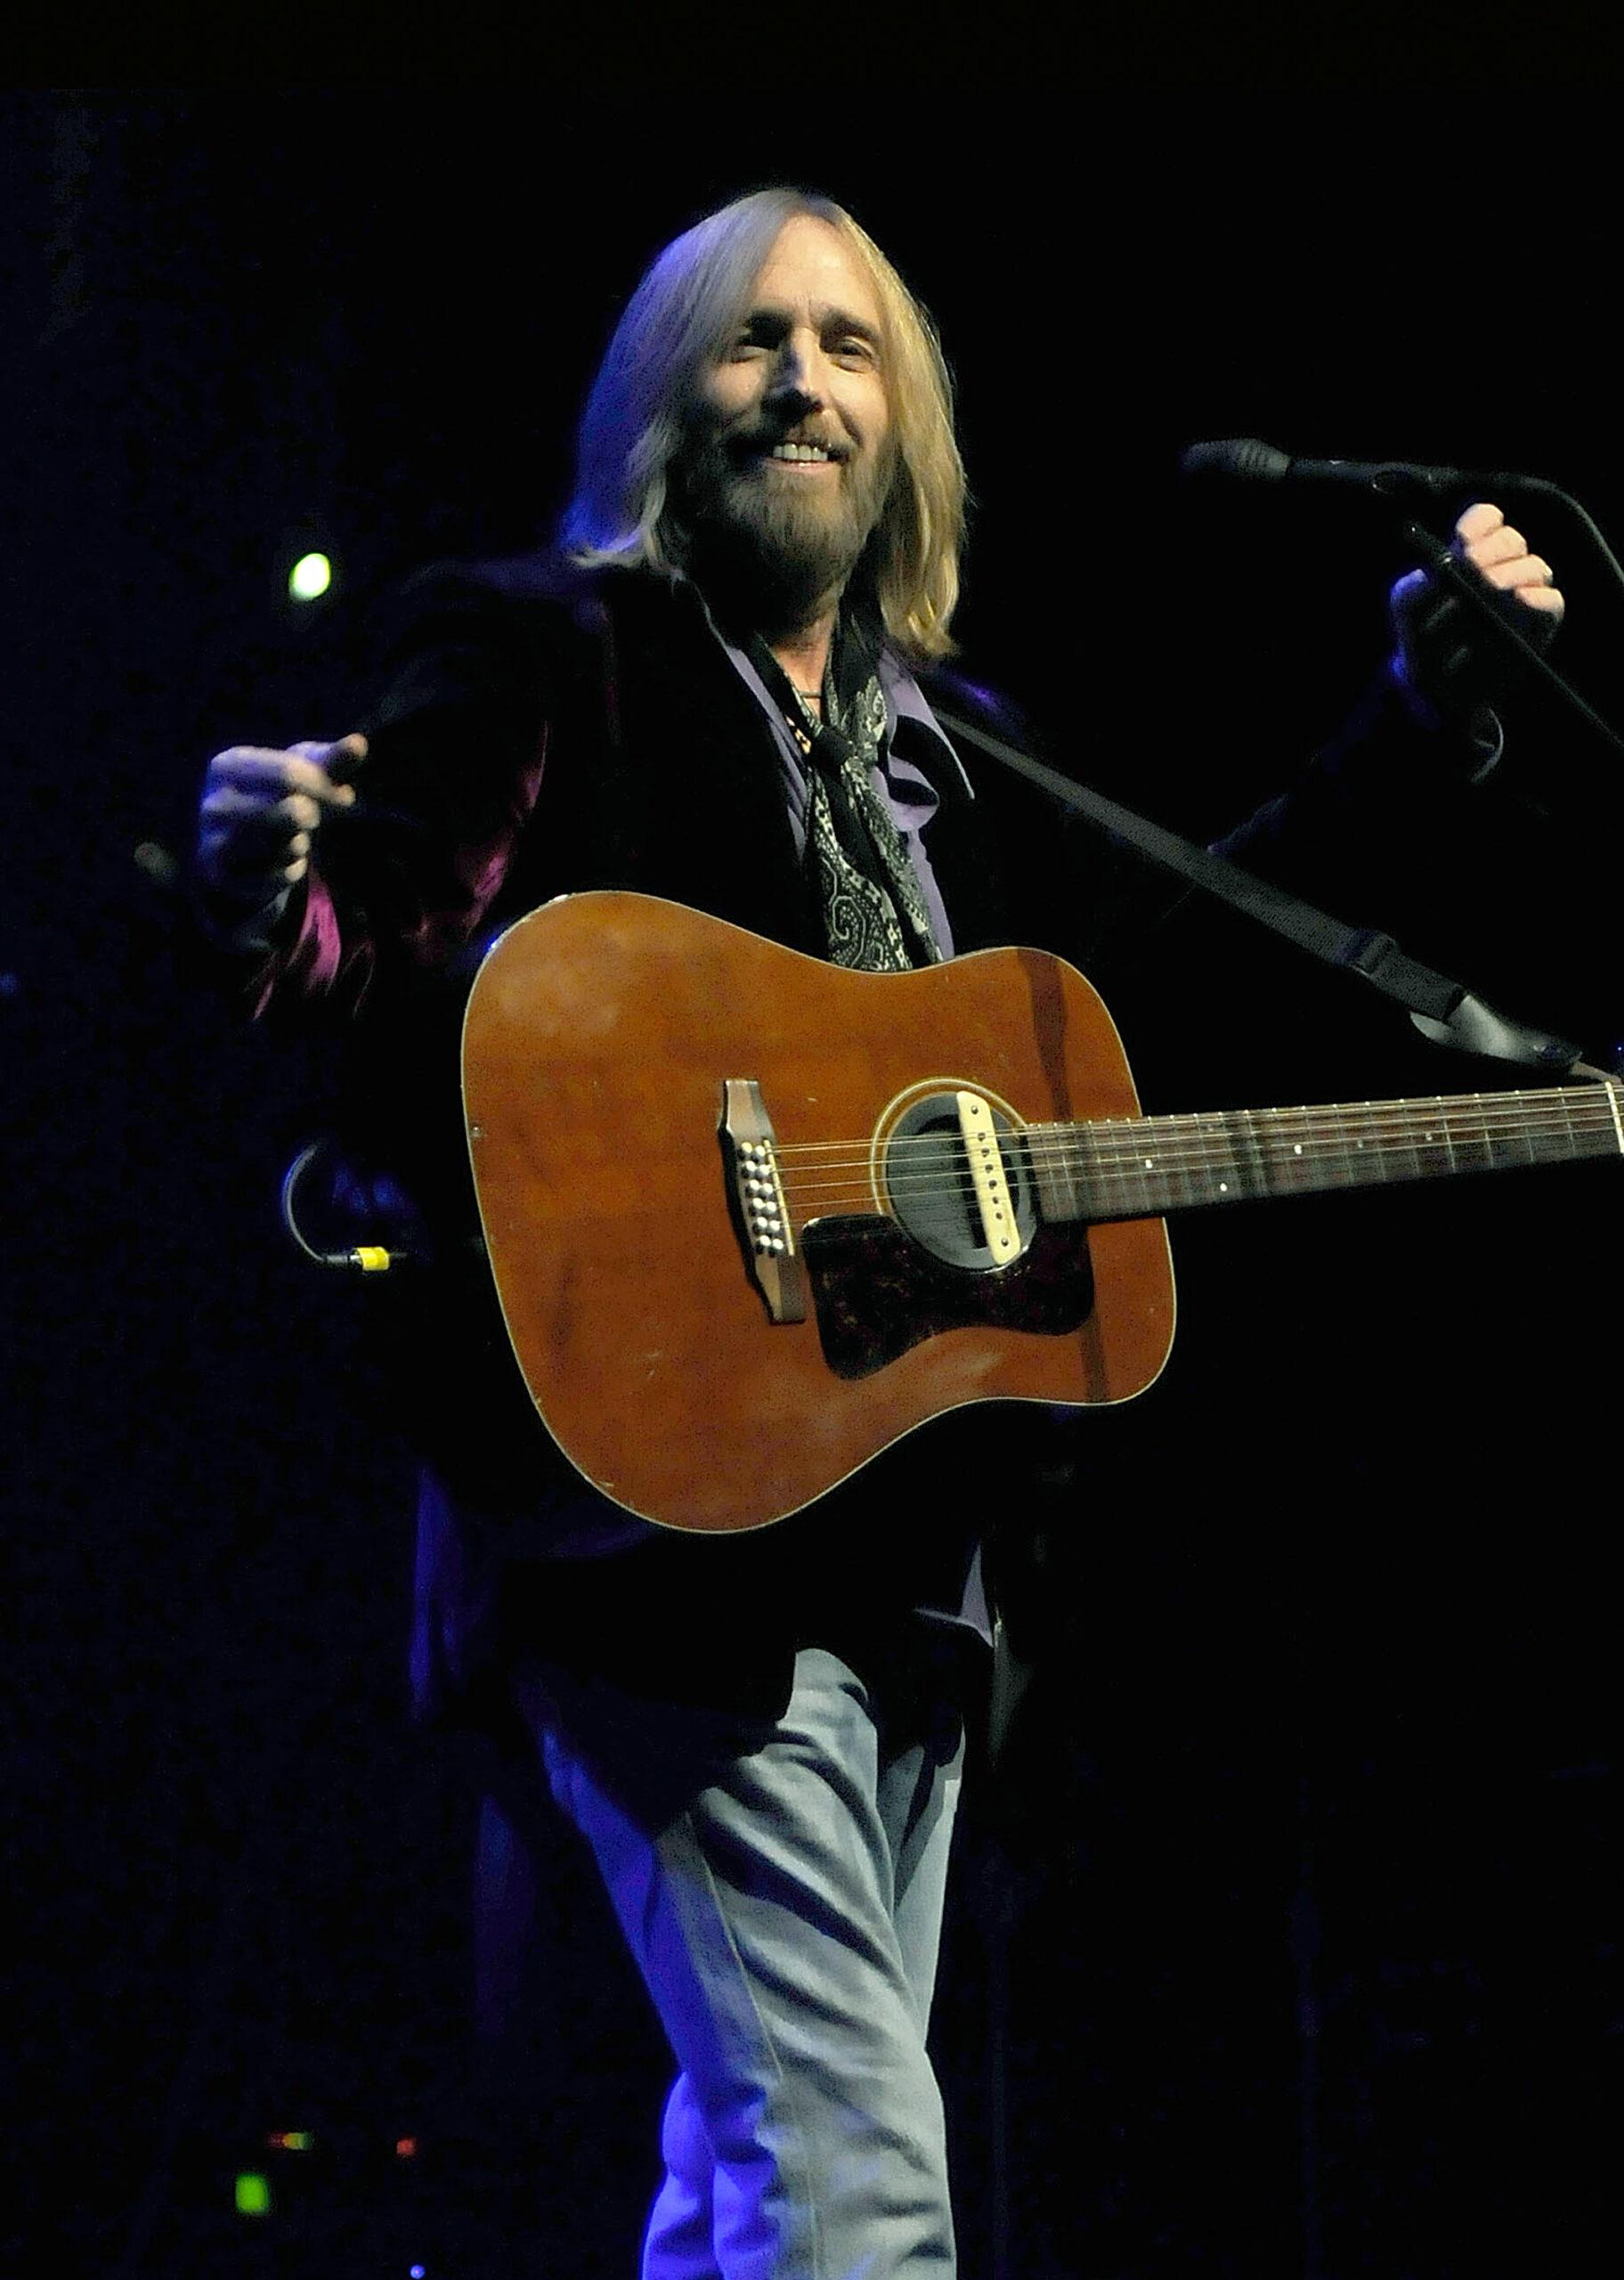 Tom Petty and the Heartbreakers perform live in concert in Sunrise Florida